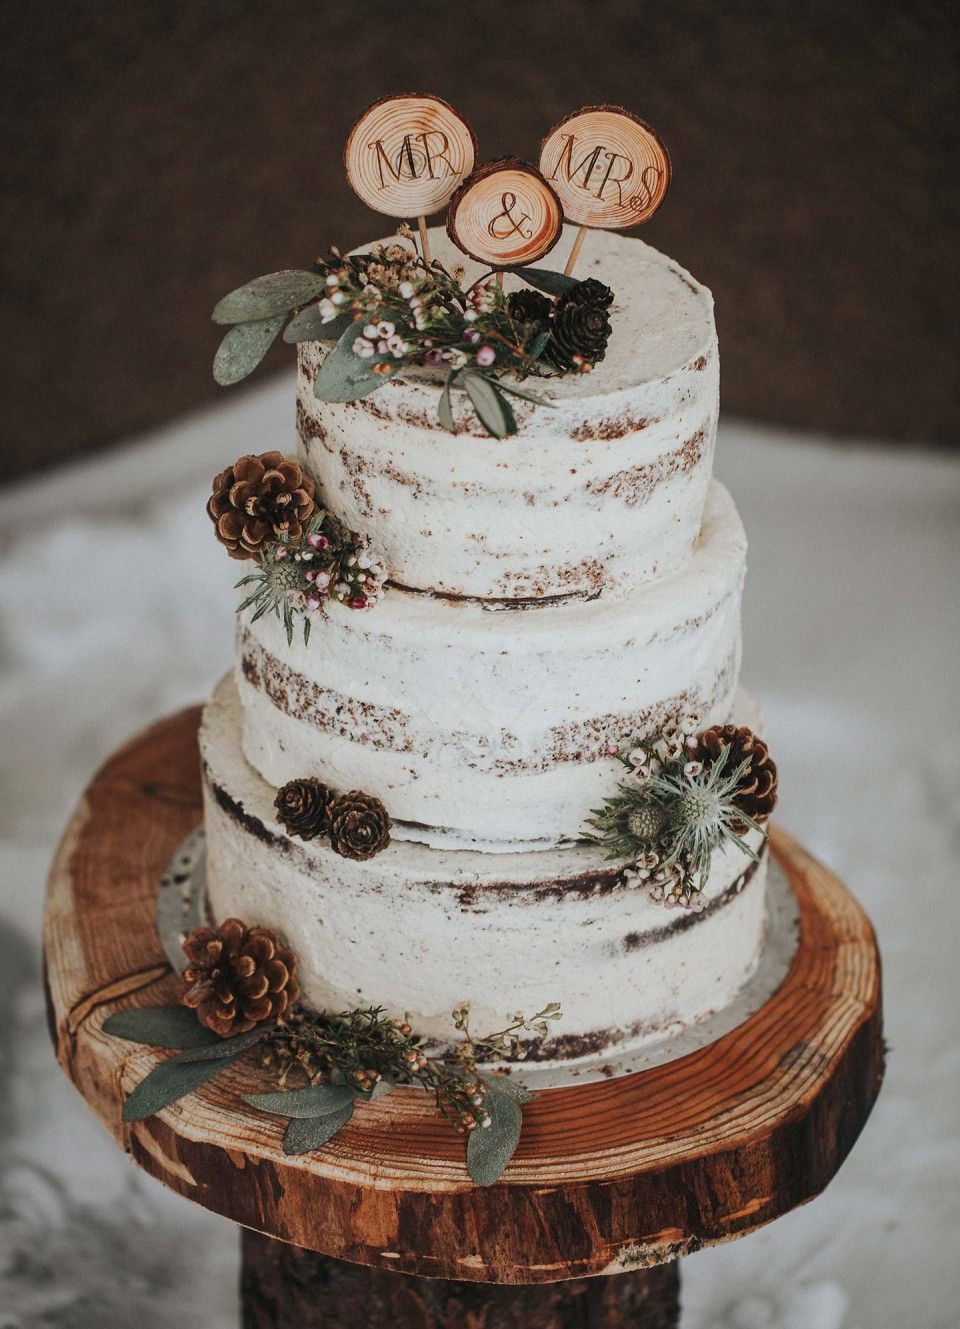 Rustic Wedding Cakes Archives - Rustic Wedding Chic